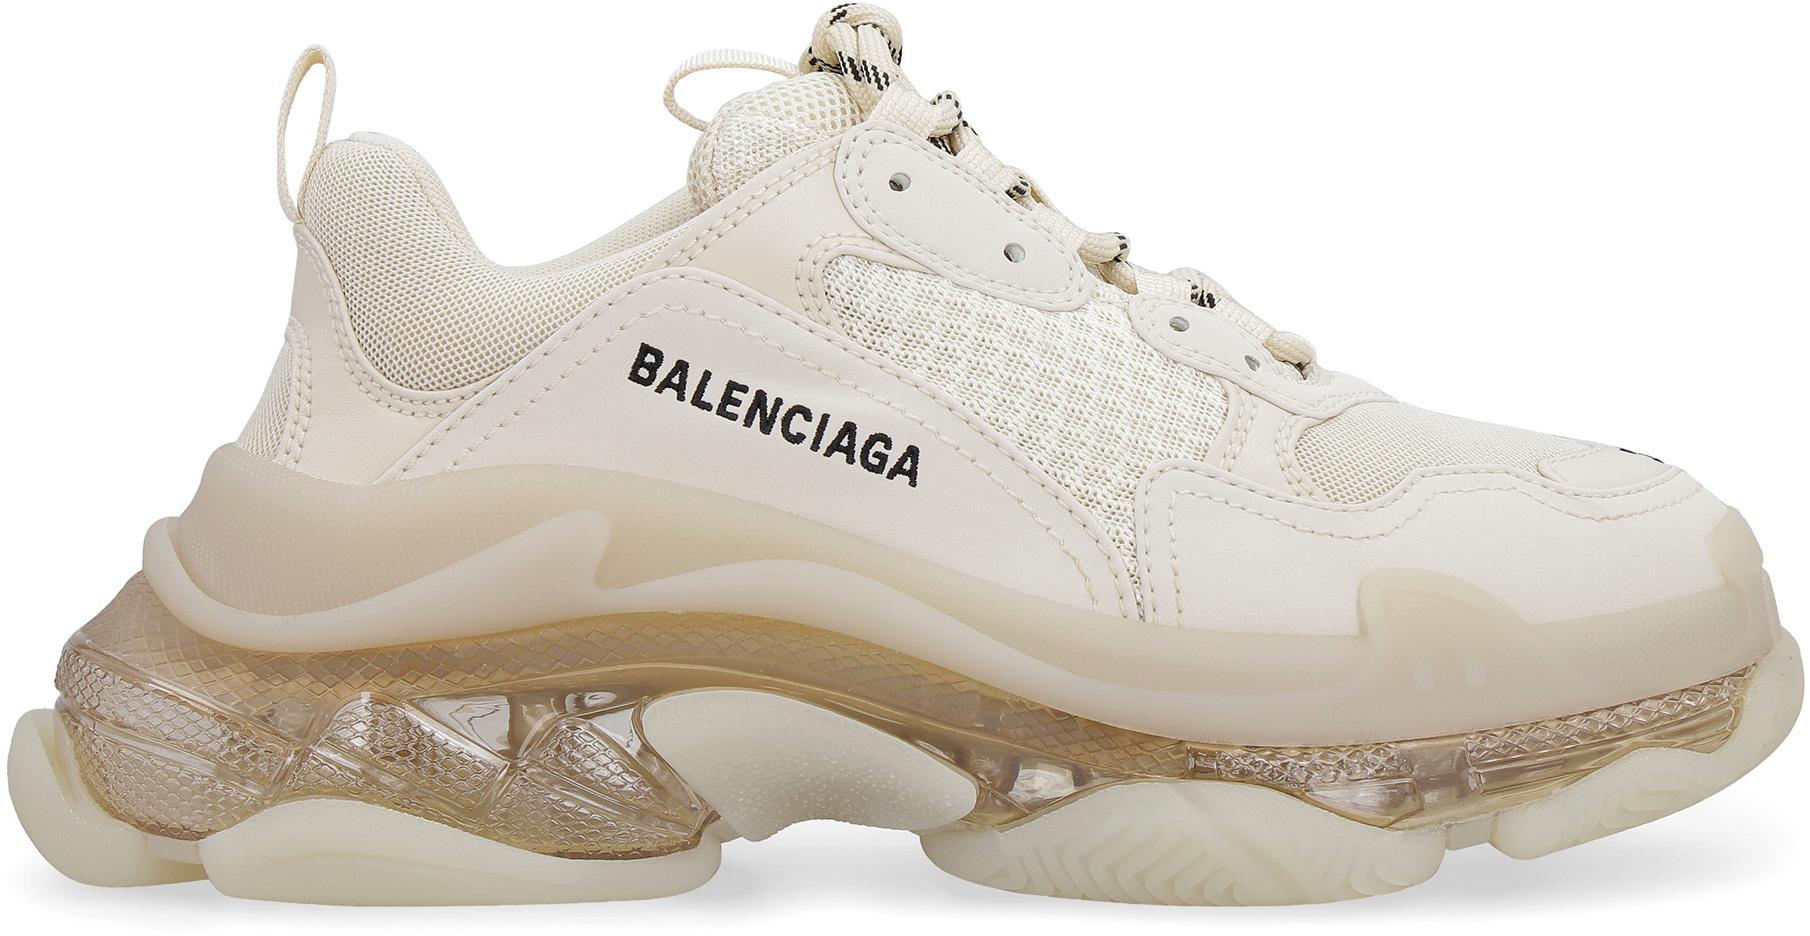 Balenciaga Leather Triple S Sneaker in Beige (Natural) - Save 47% - Lyst